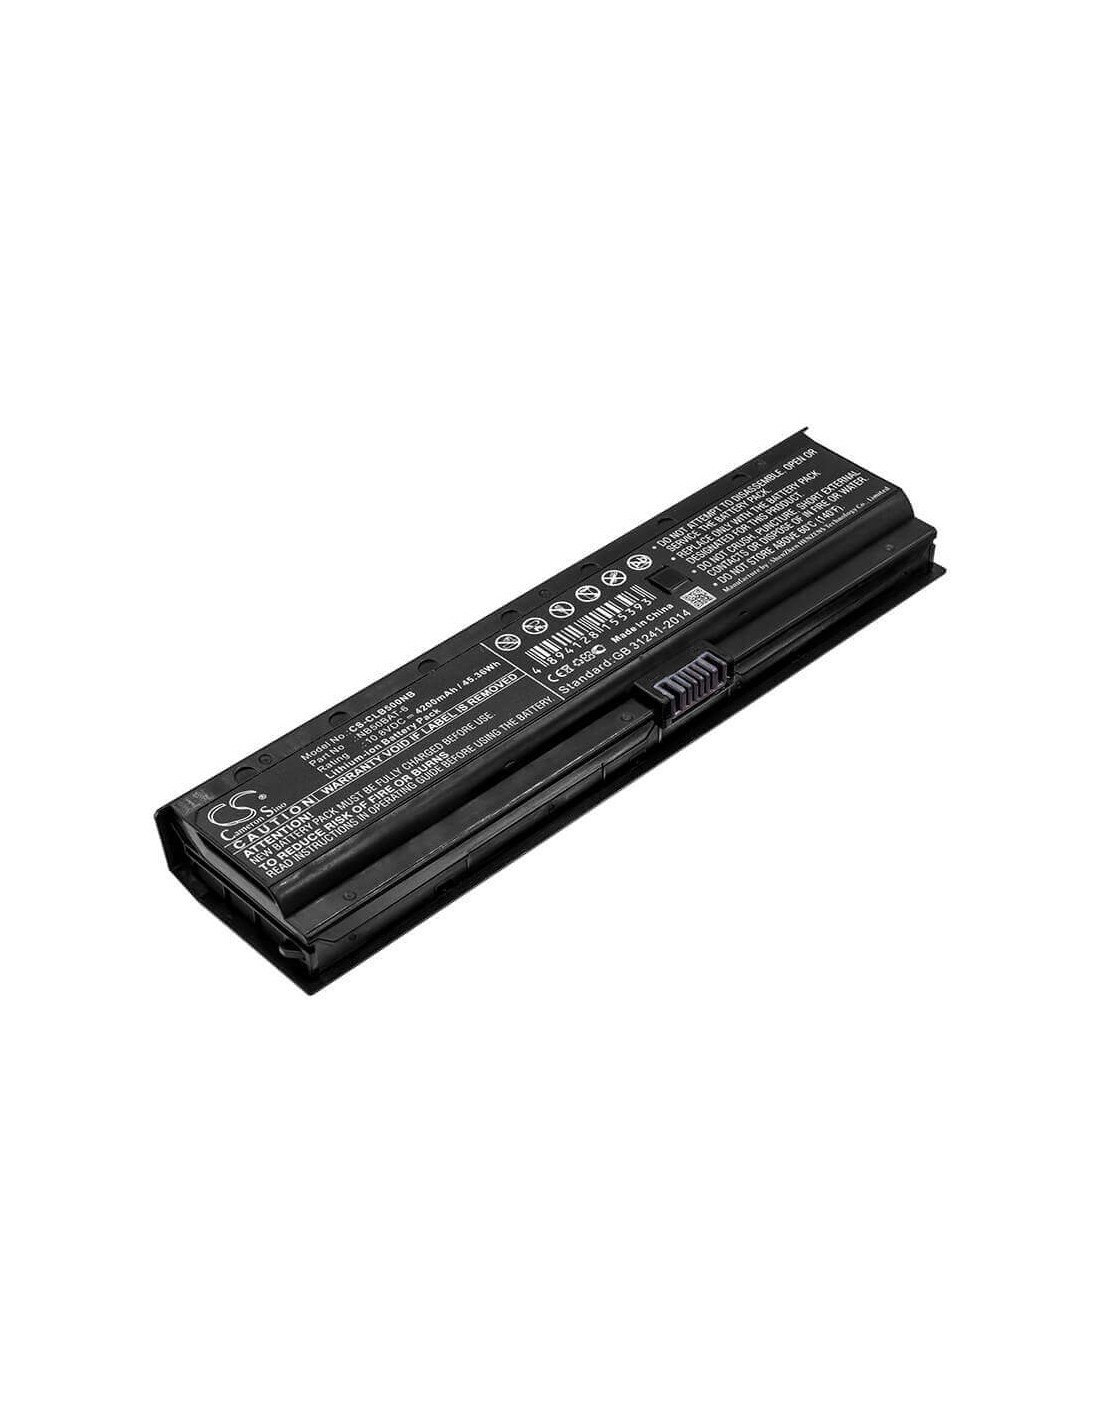 Battery for Cjscope, Qx-350 Rx, Clevo, Nb50tj1 10.8V, 4200mAh - 45.36Wh